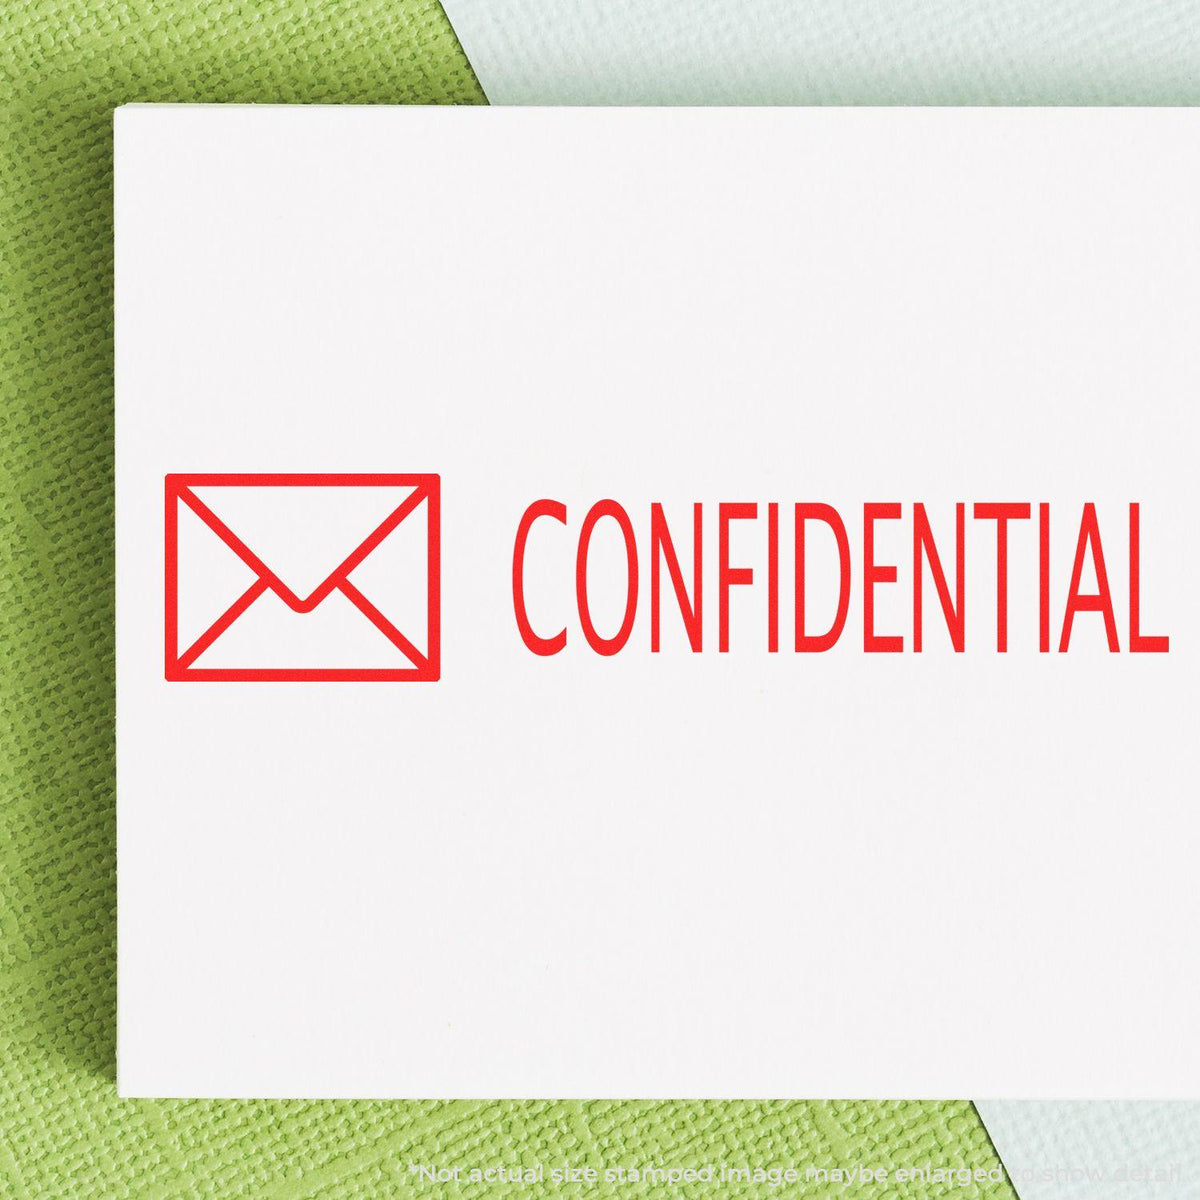 In Use Large Confidential with Envelope Rubber Stamp Image